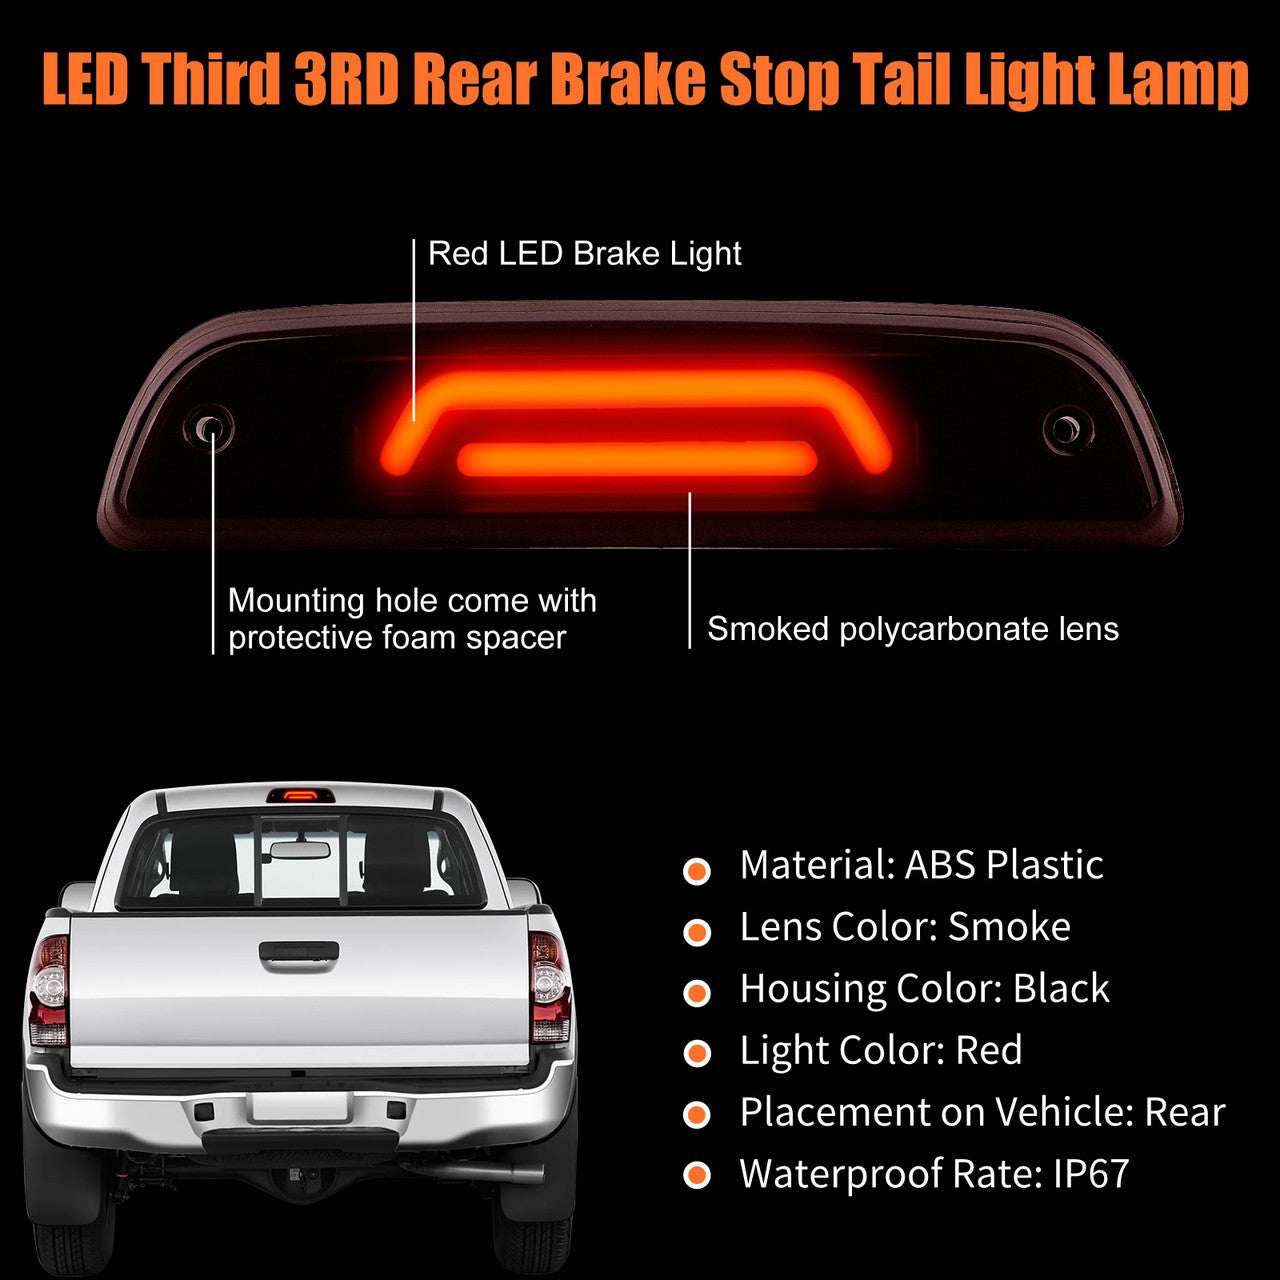 LED Third 3rd Rear Brake Light - Center High Mount Stop Lamp Replacement For Toyota Tacoma 1995-2017